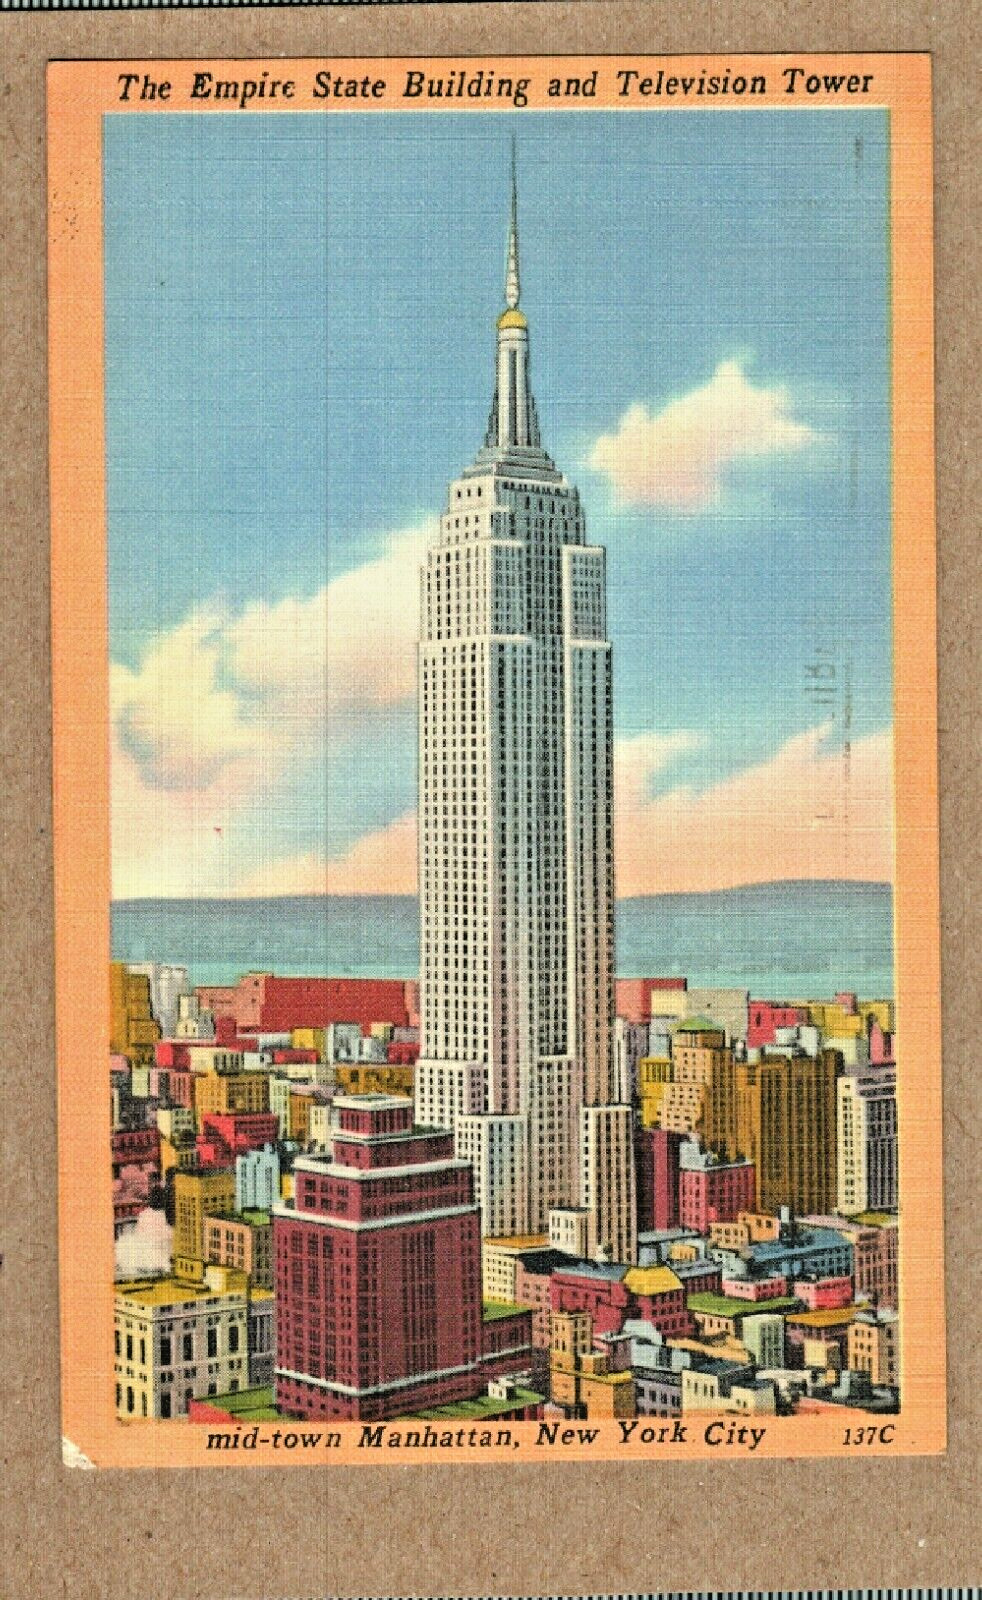 THE EMPIRE STATE BUILDING & TV TOWER - NEW YORK   VINTAGE POSTCARD - STAMP 1956